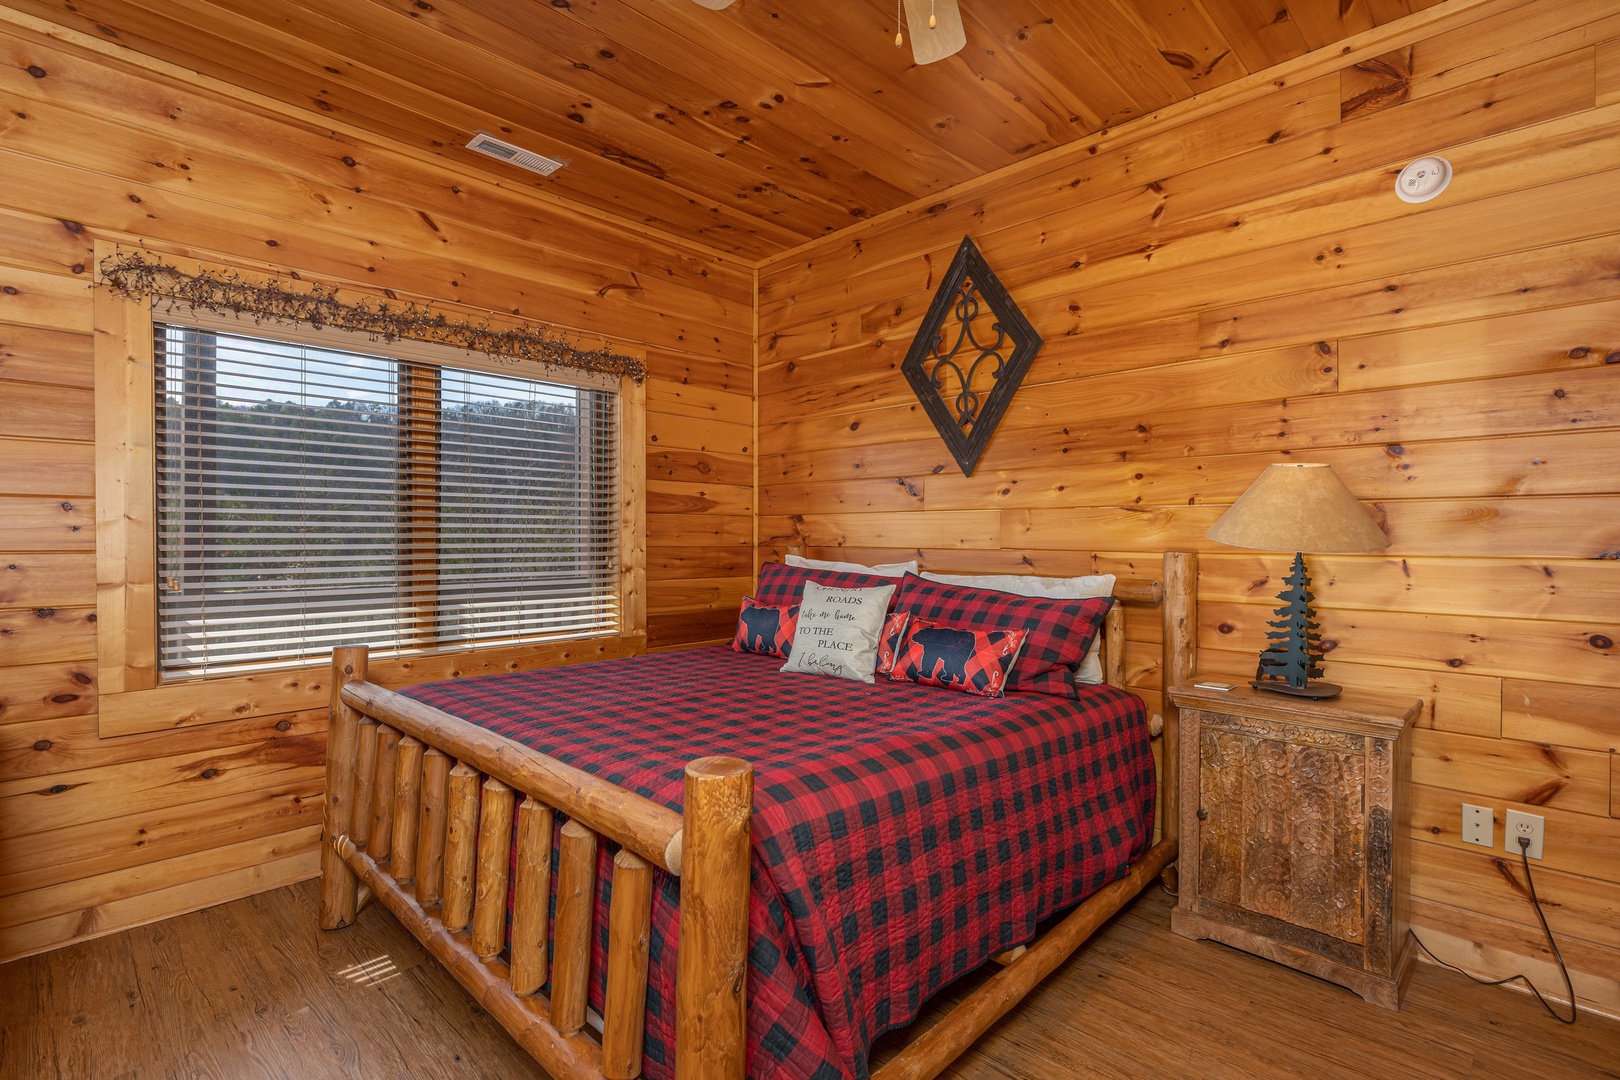 King Bed at Mountain Mama, a 3 bedroom cabin rental located in pigeon forge